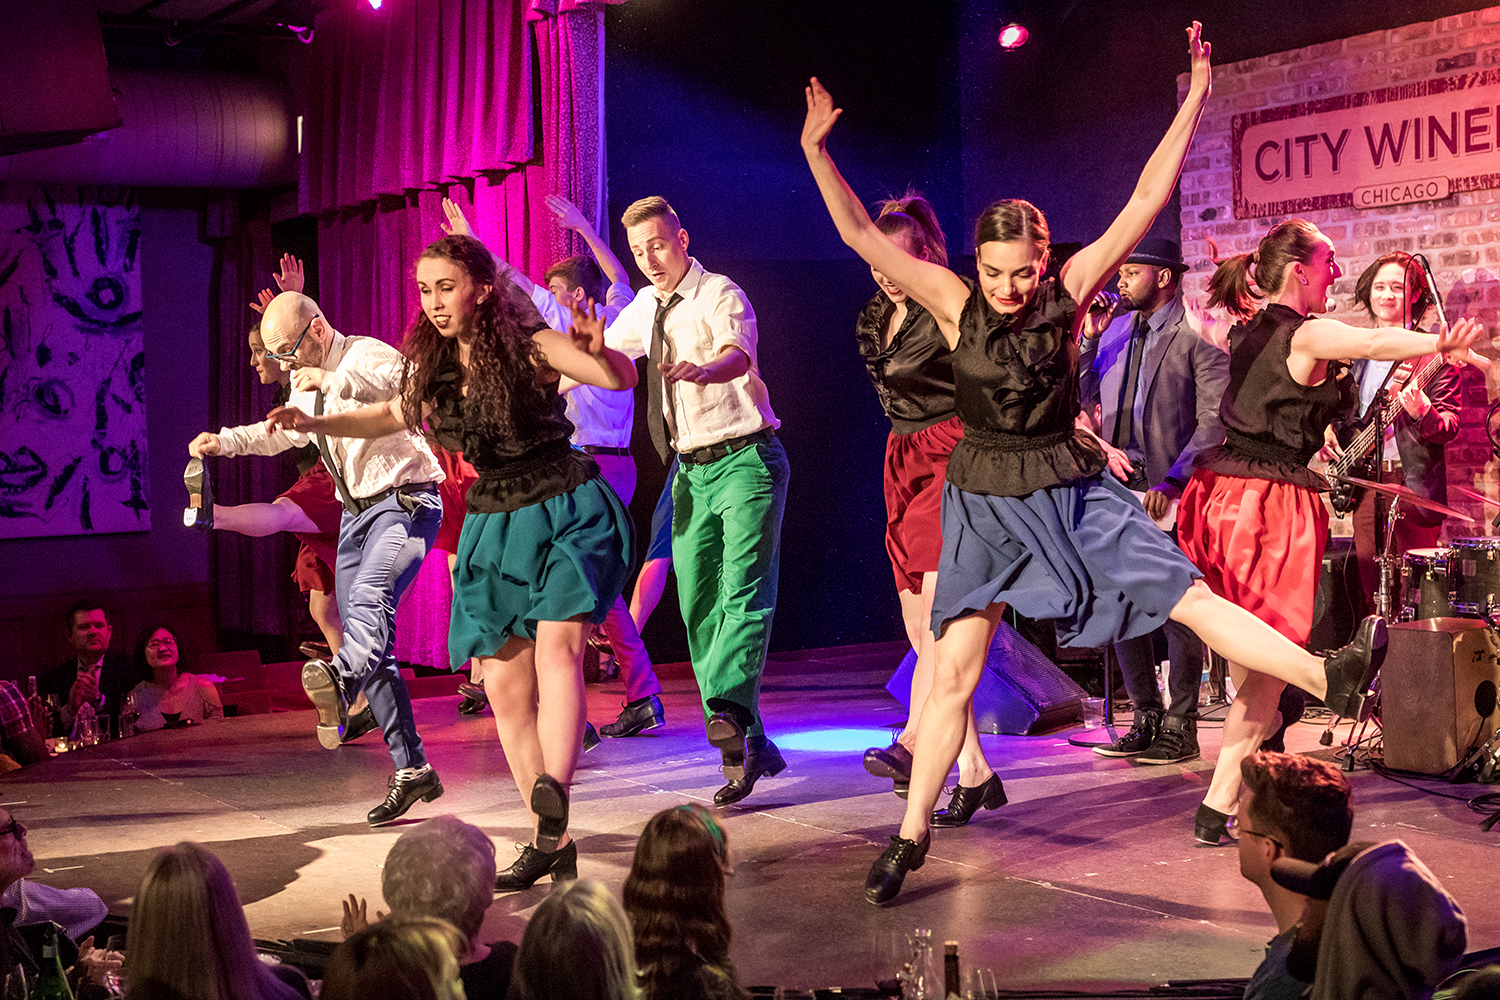  The Chicago Tap Theatre performs in “Sweet Tap Chicago” at City Winery Chicago on Sunday, Mar. 11, 2018.  